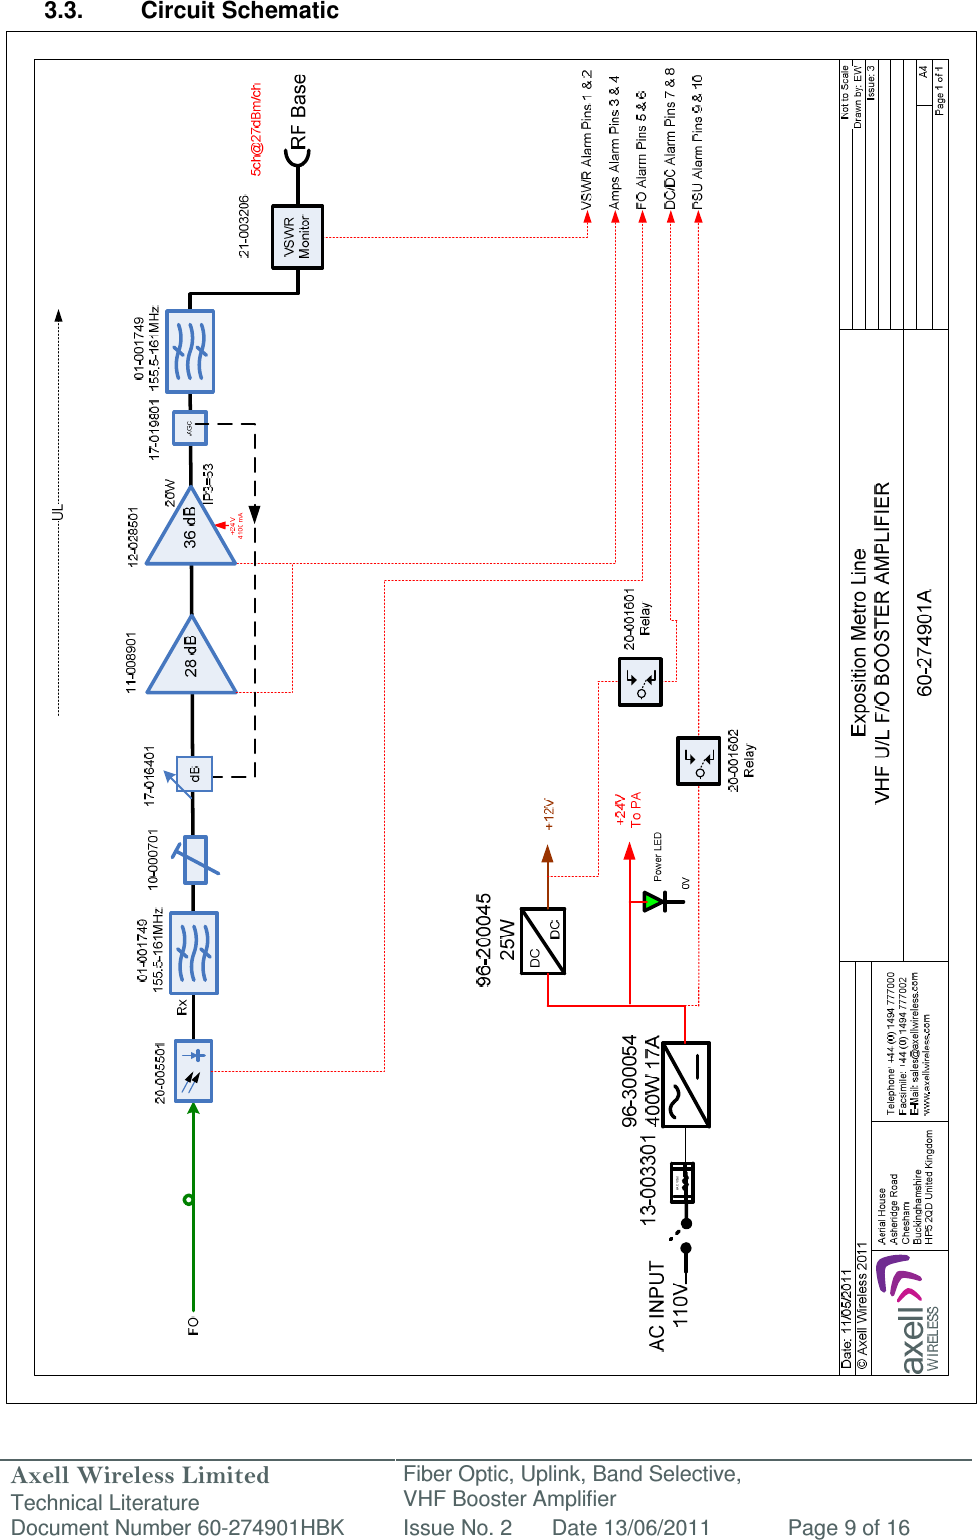 Axell Wireless Limited Technical Literature Fiber Optic, Uplink, Band Selective,  VHF Booster Amplifier Document Number 60-274901HBK Issue No. 2 Date 13/06/2011 Page 9 of 16   3.3.  Circuit Schematic                                                         